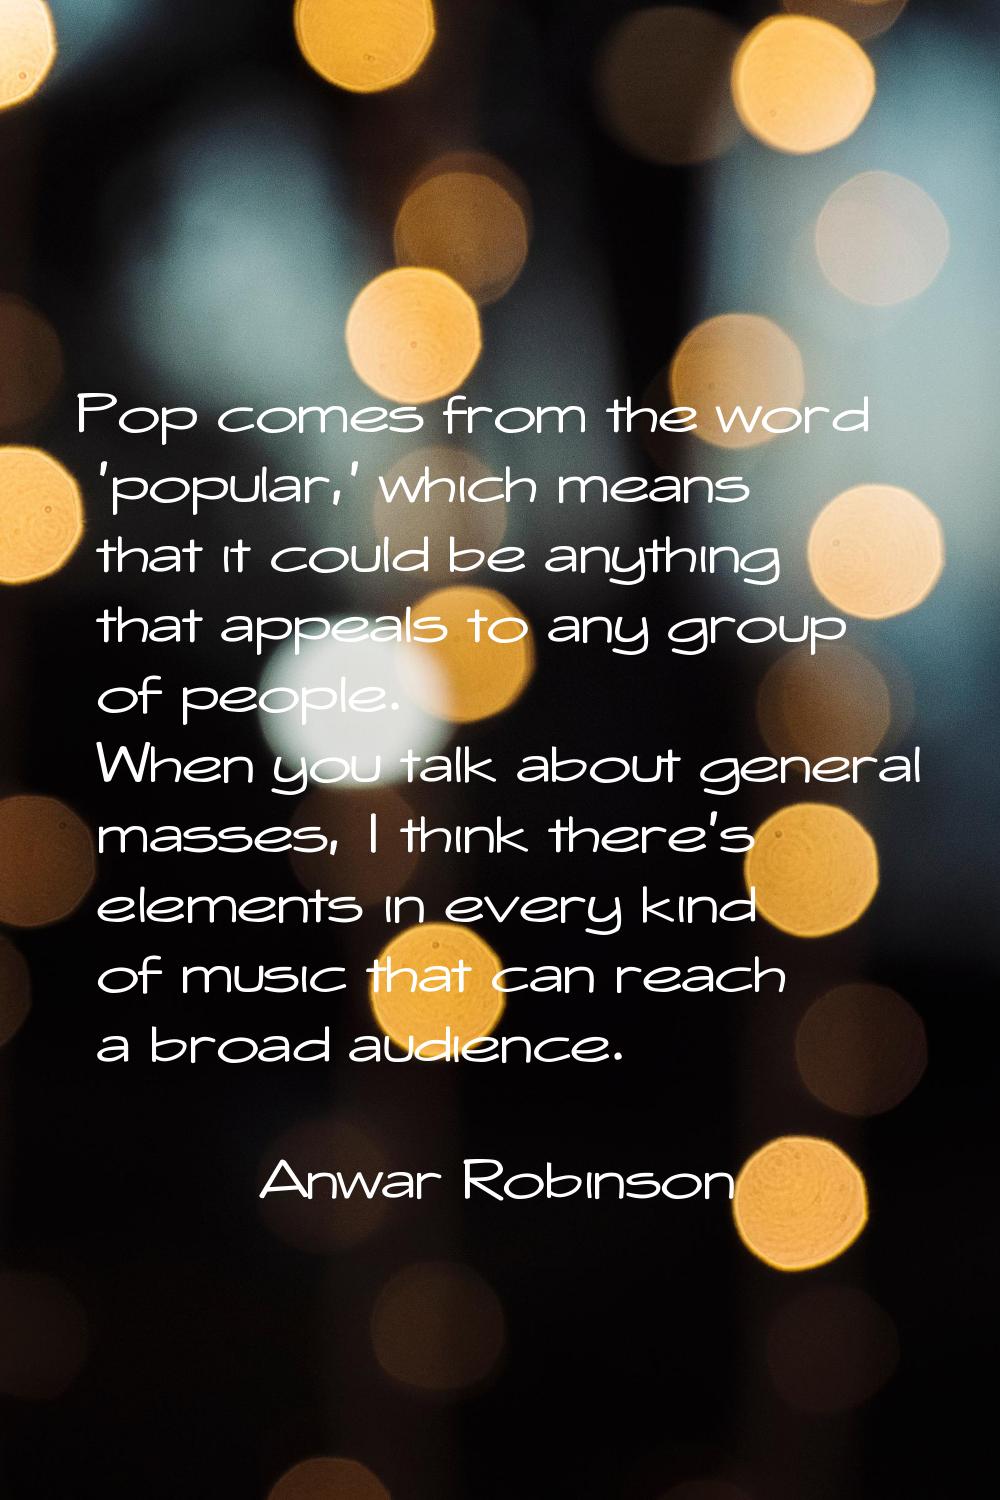 Pop comes from the word 'popular,' which means that it could be anything that appeals to any group 